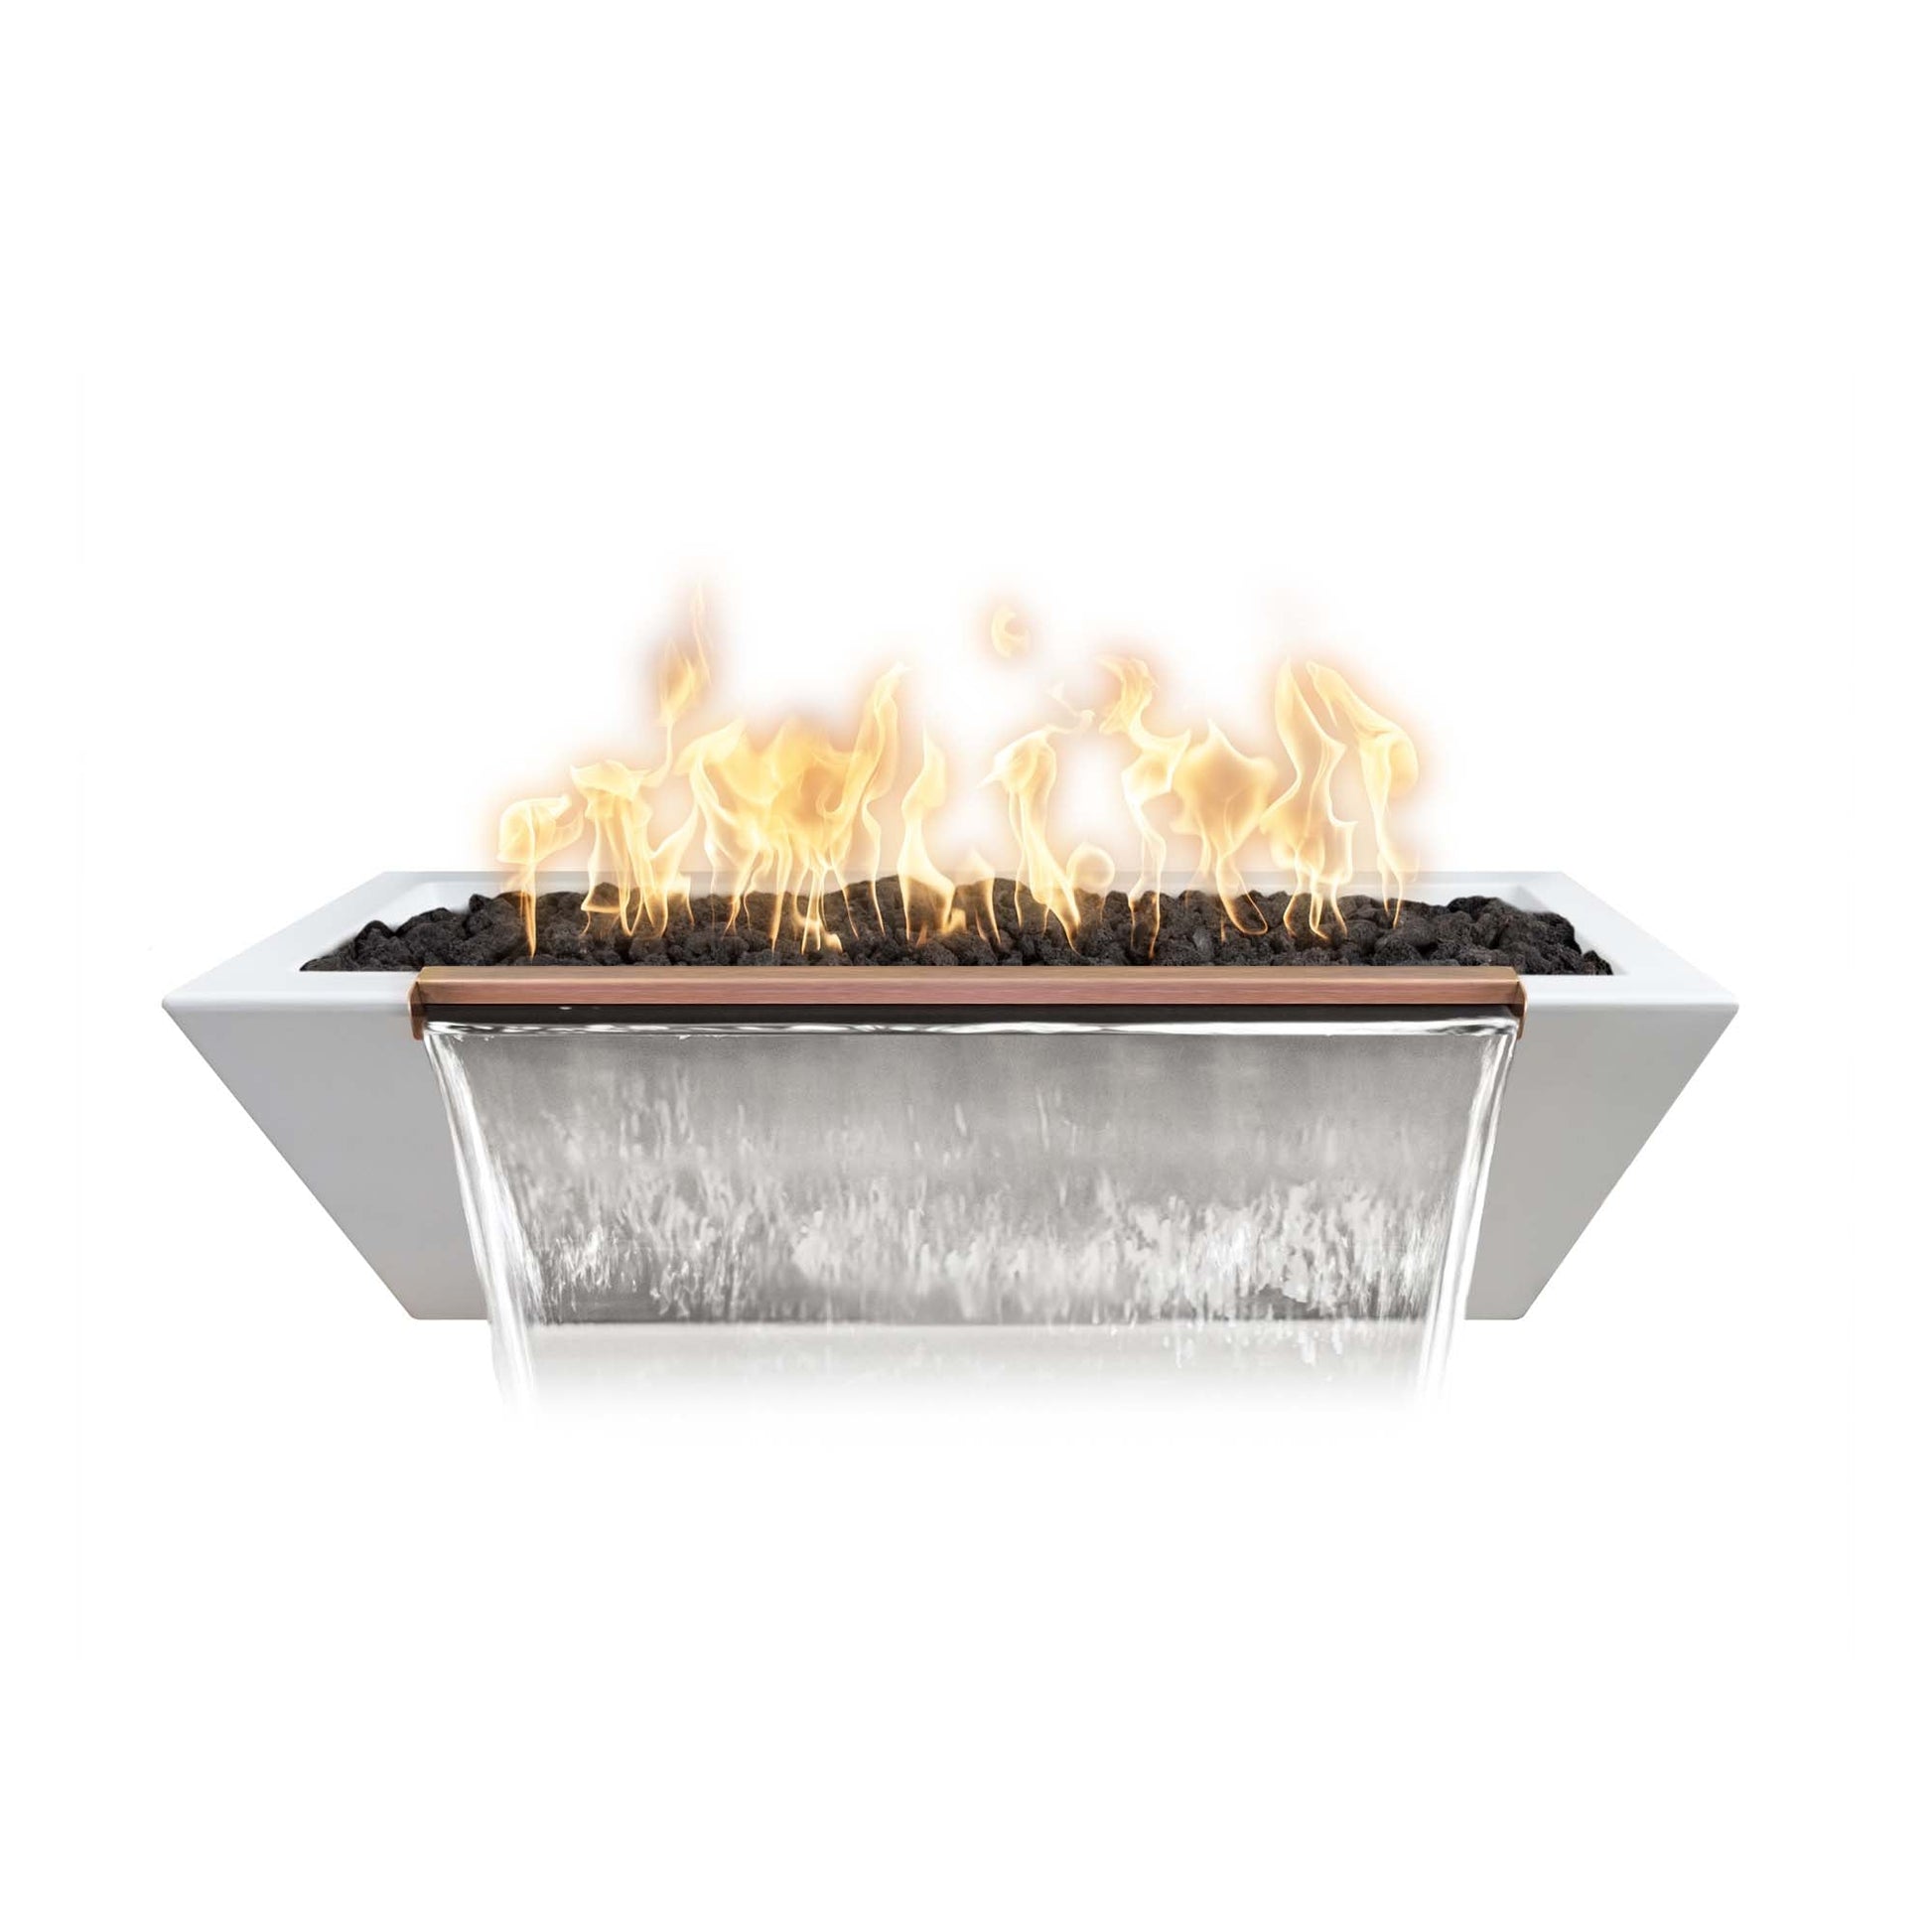 The Outdoor Plus Linear Maya 72" Rustic Moss Stone GFRC Concrete Liquid Propane Fire & Water Bowl with Match Lit with Flame Sense Ignition